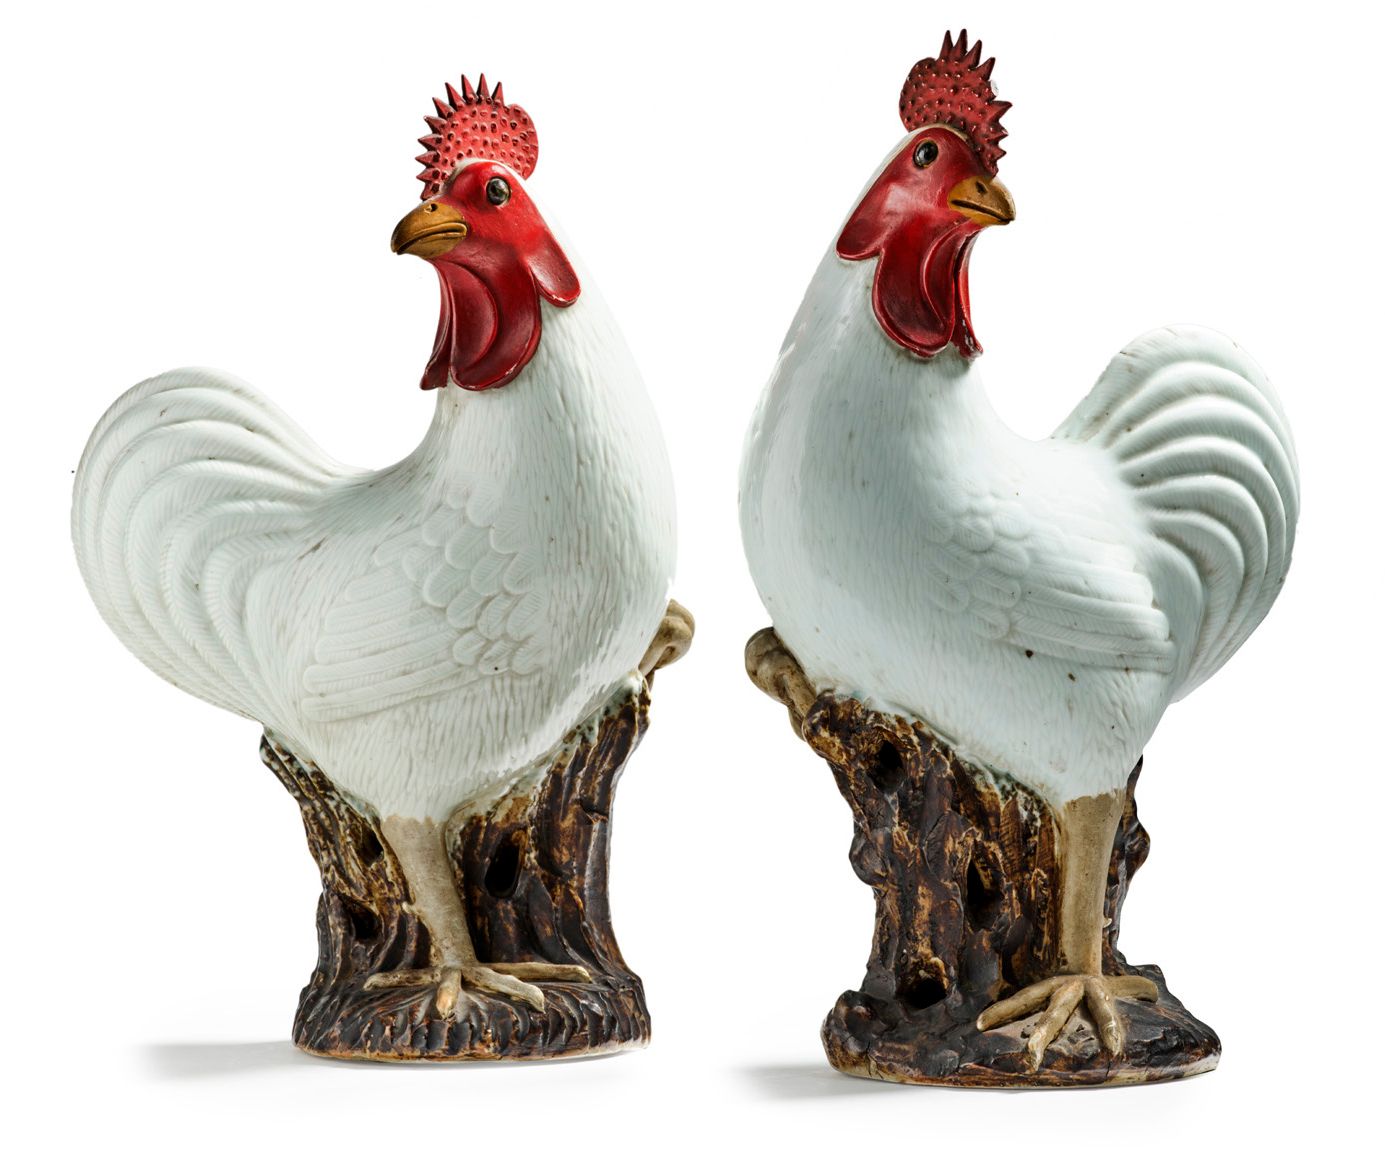 CHINE XVIIIe SIÈCLE, PÉRIODE QING 
Pair of standing roosters, perched on rocks, &hellip;